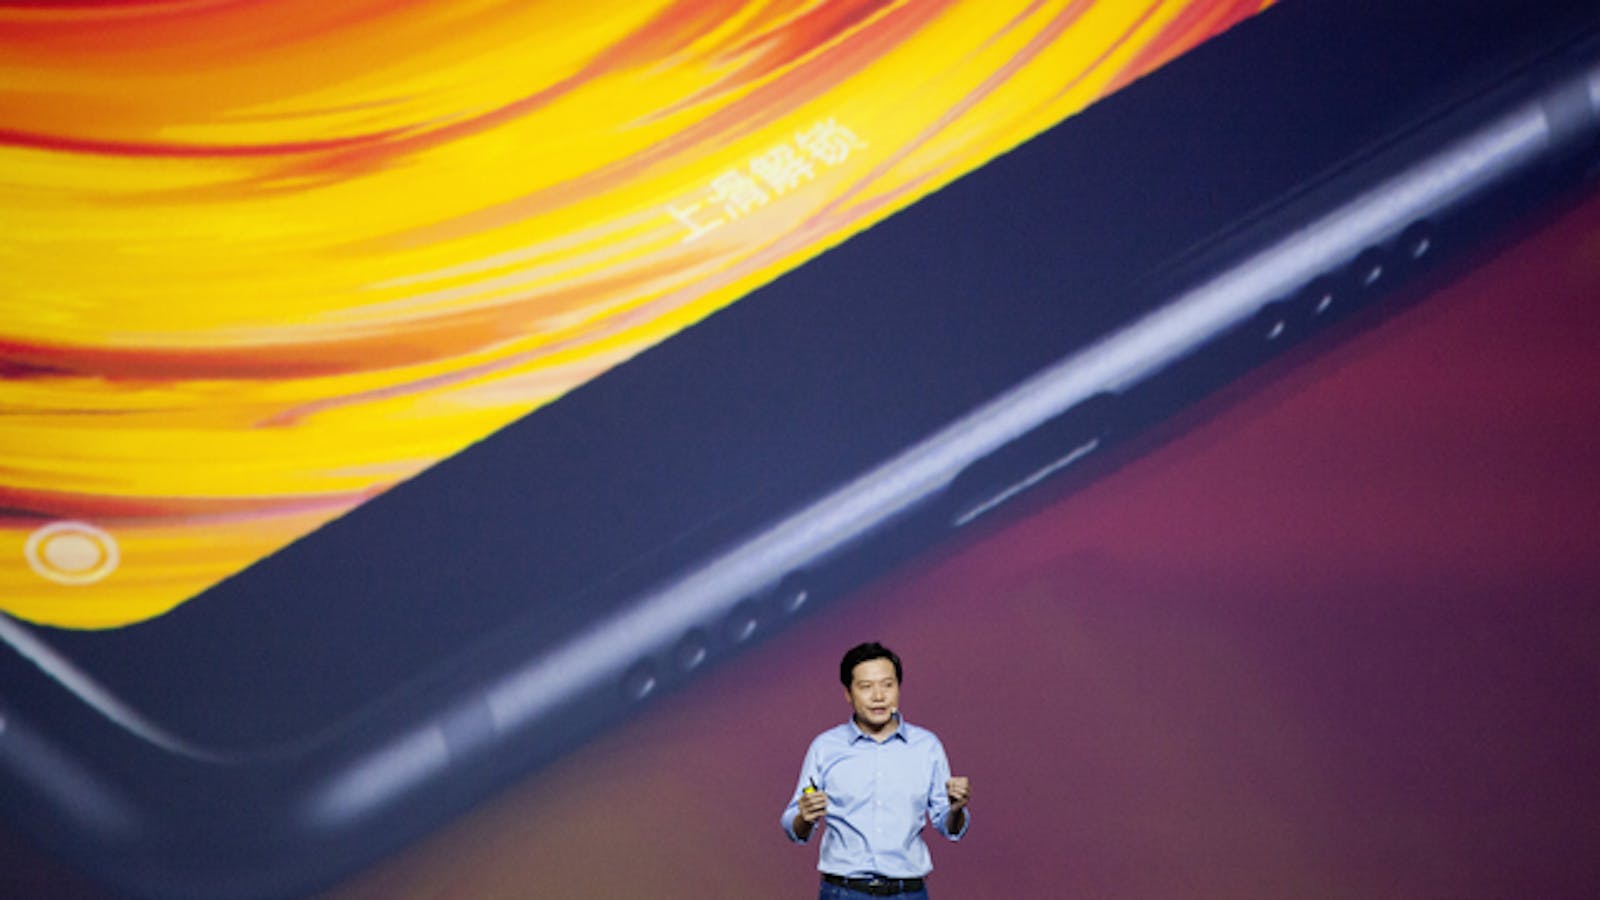 Xiaomi CEO Lei Jun unveiling a new smartphone in China in September. Photo by Bloomberg.